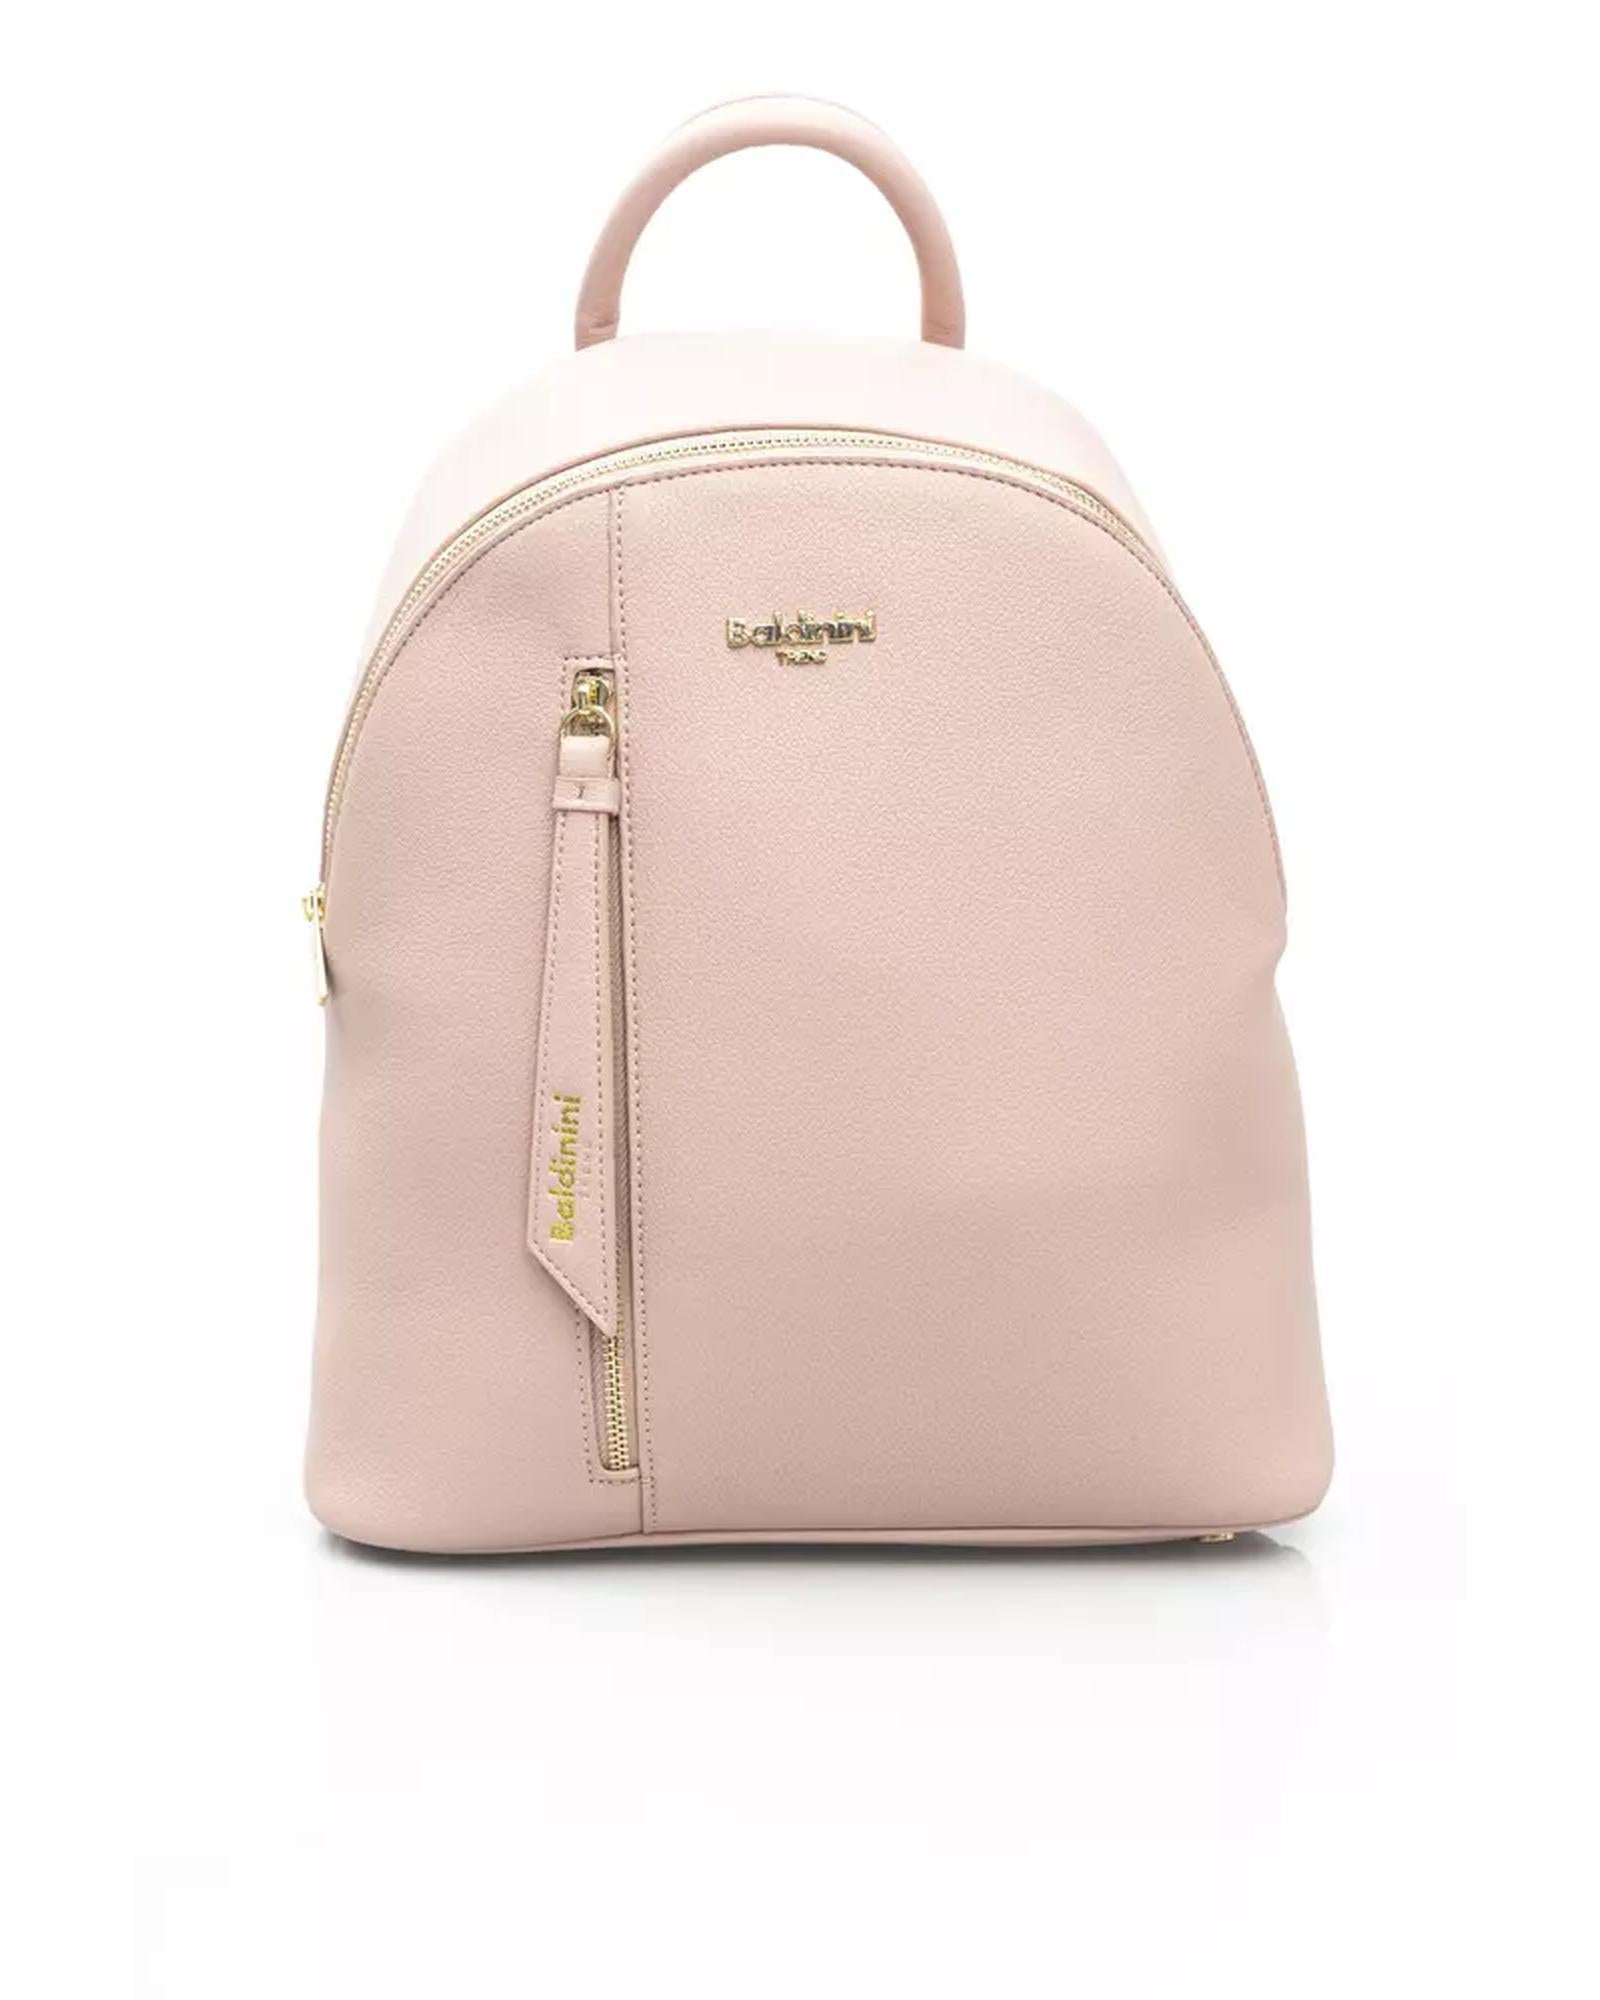 Golden Logo Backpack with Zip Closure and Adjustable Straps One Size Women